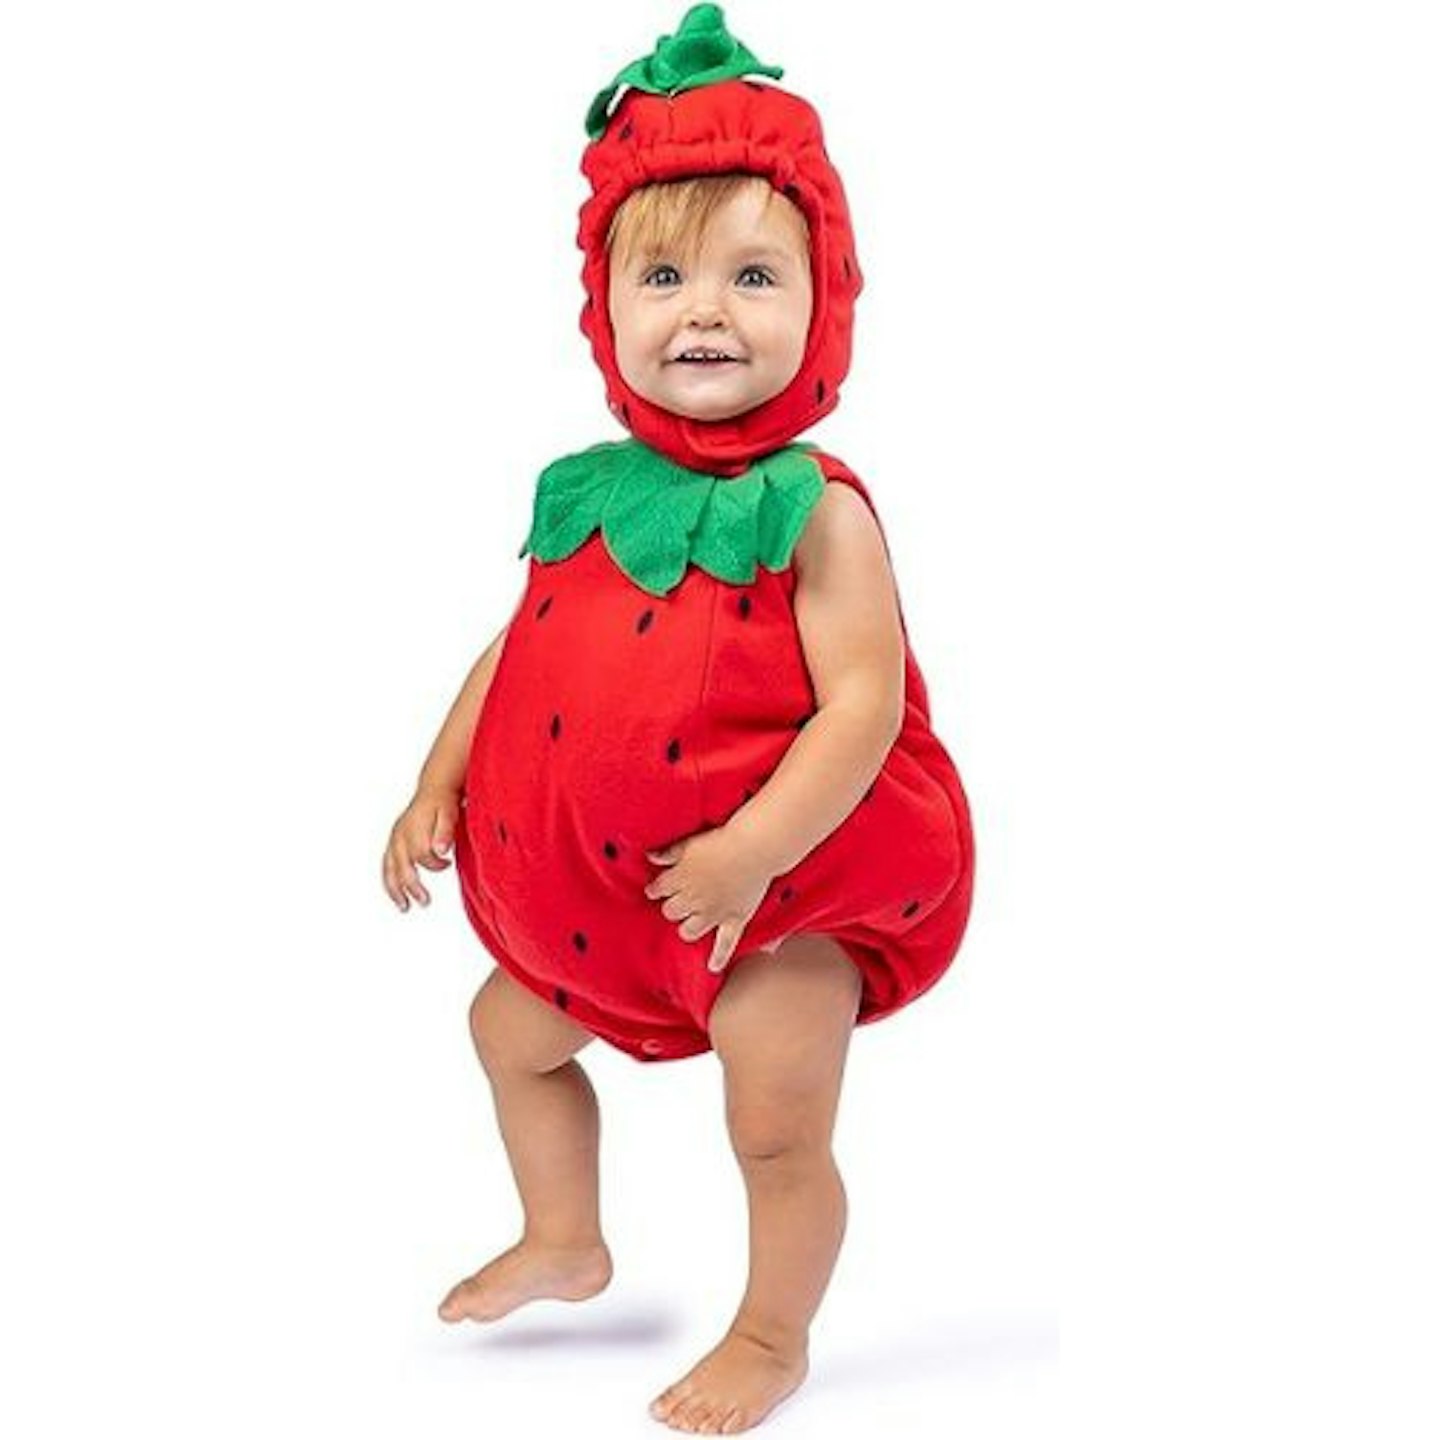 The Best Baby Halloween Costumes: Dress Up America Baby Strawberry Costume 